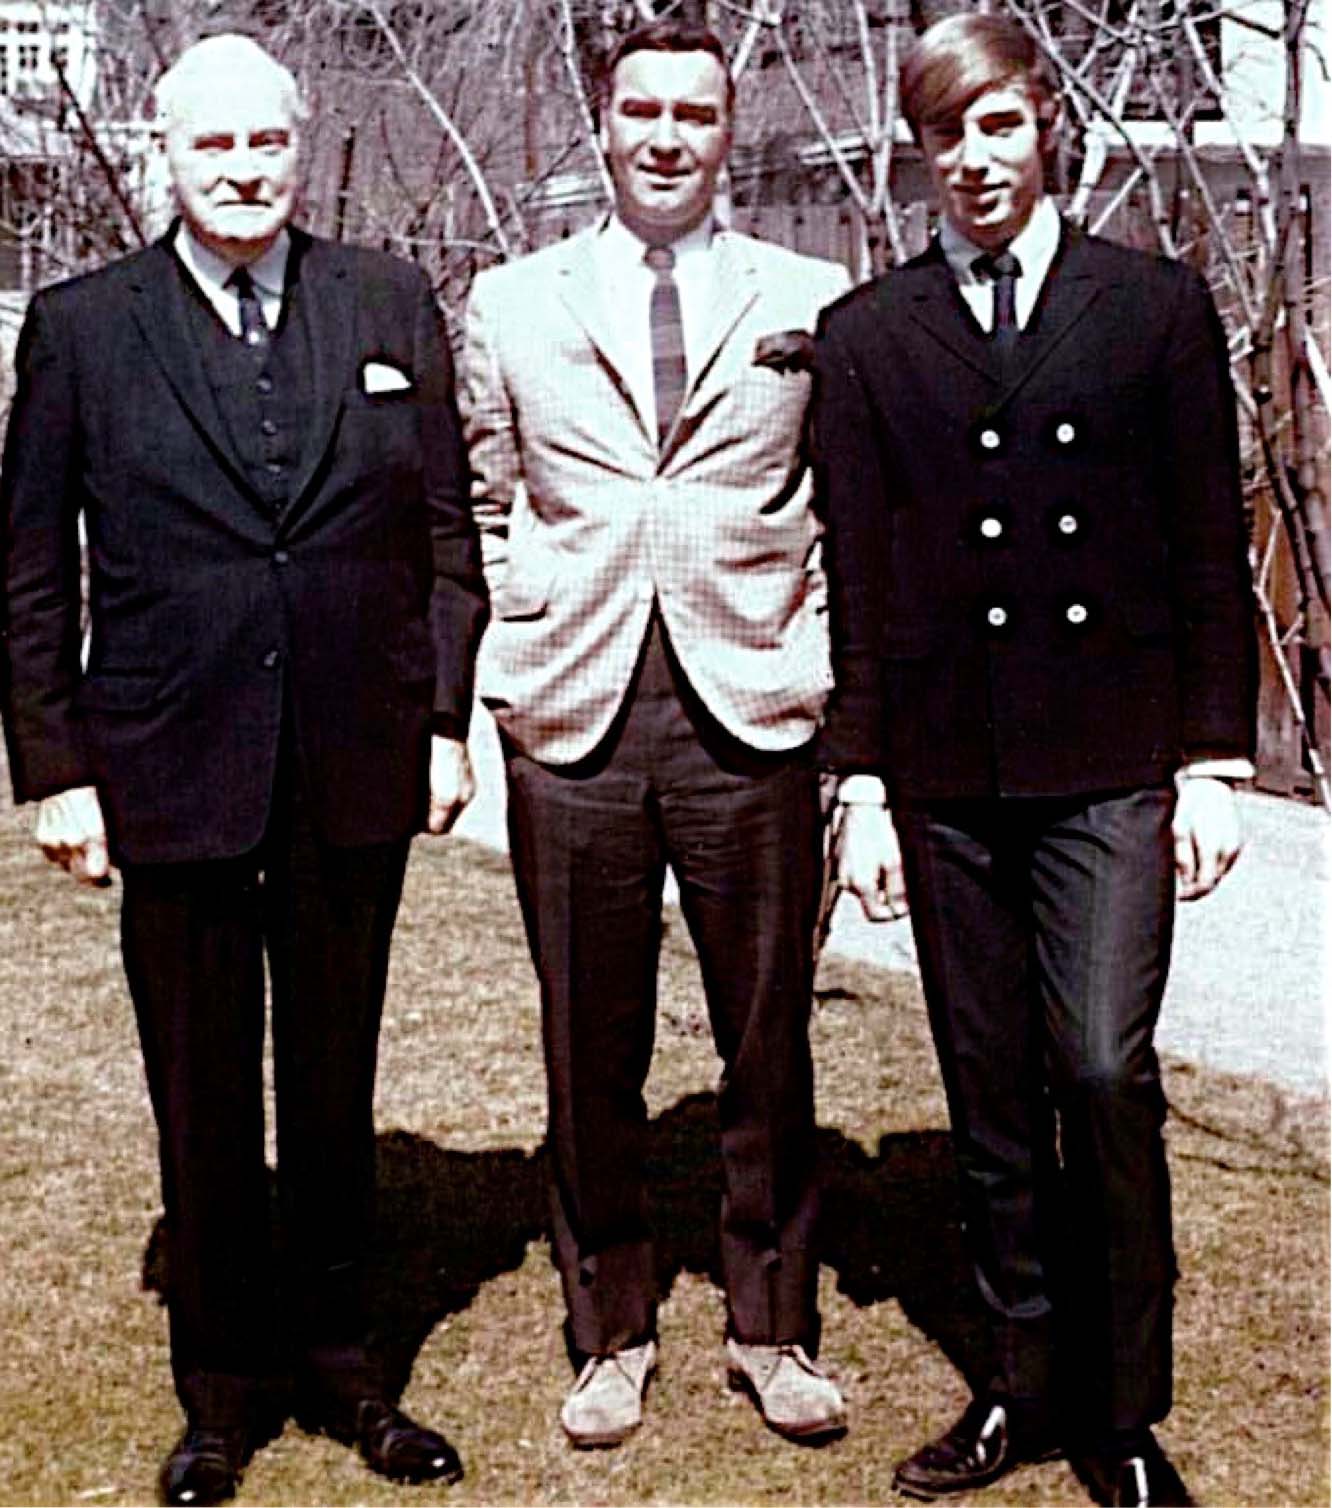 Rick with his father and paternal grandfather